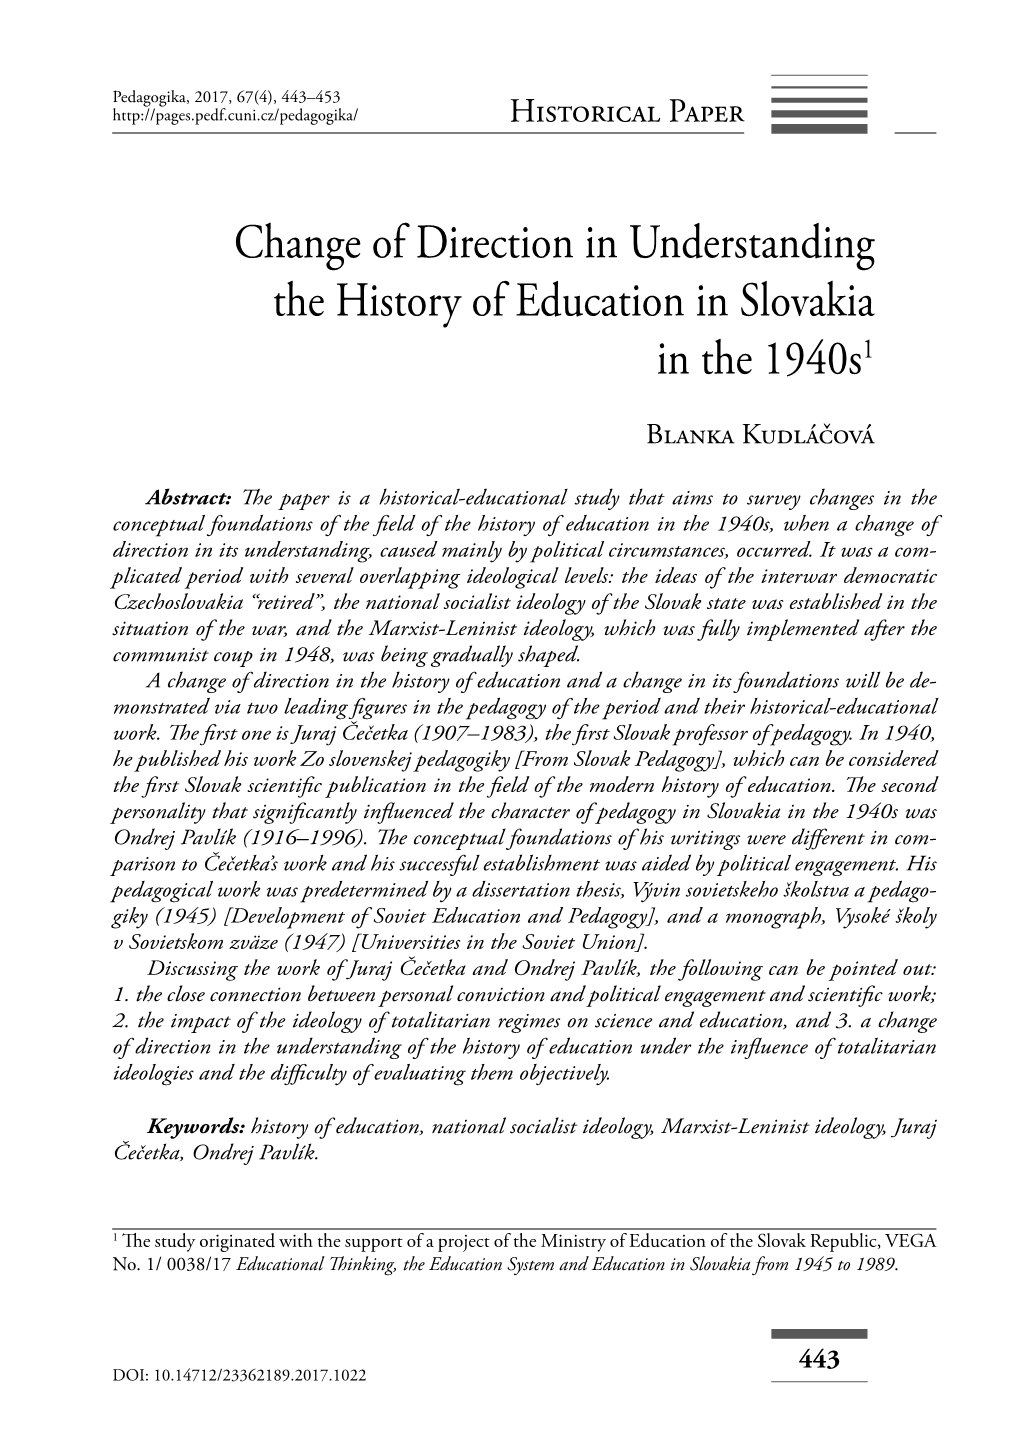 Change of Direction in Understanding the History of Education in Slovakia in the 1940S1